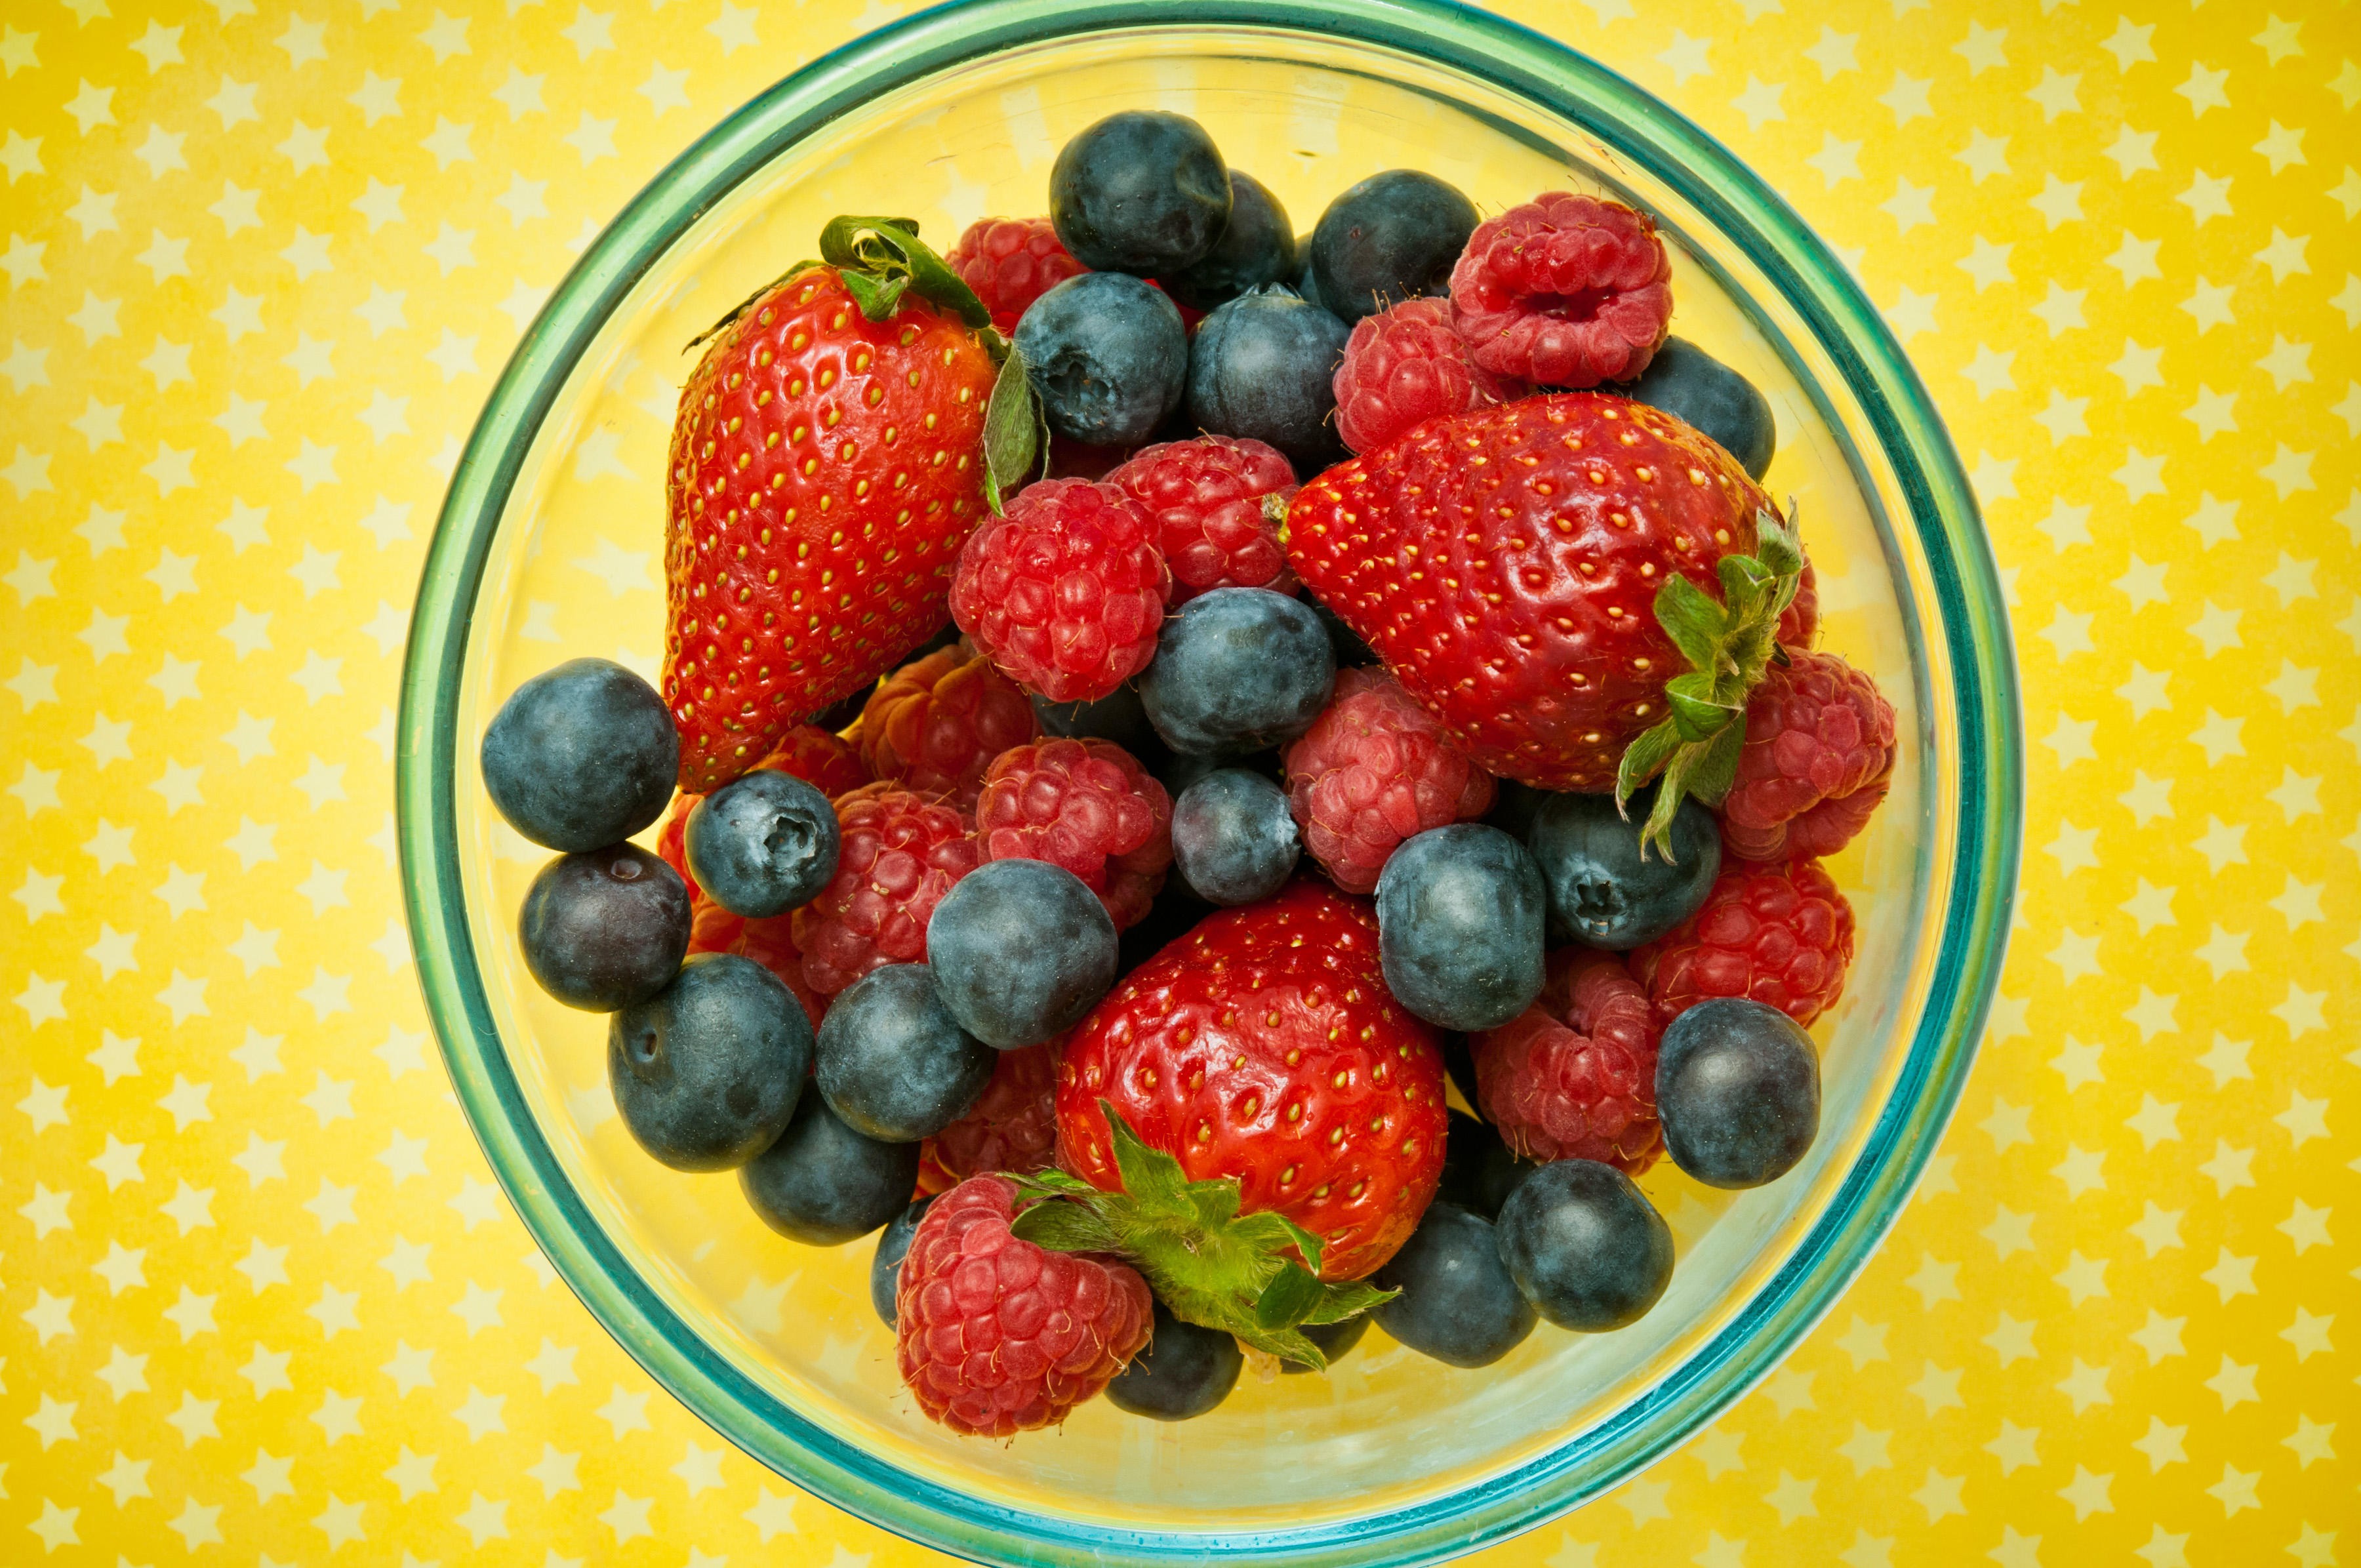 Fruits such as blueberries and strawberries help balance the immune system and are good anti-inflammatory dietary choices. Photo: Alamy